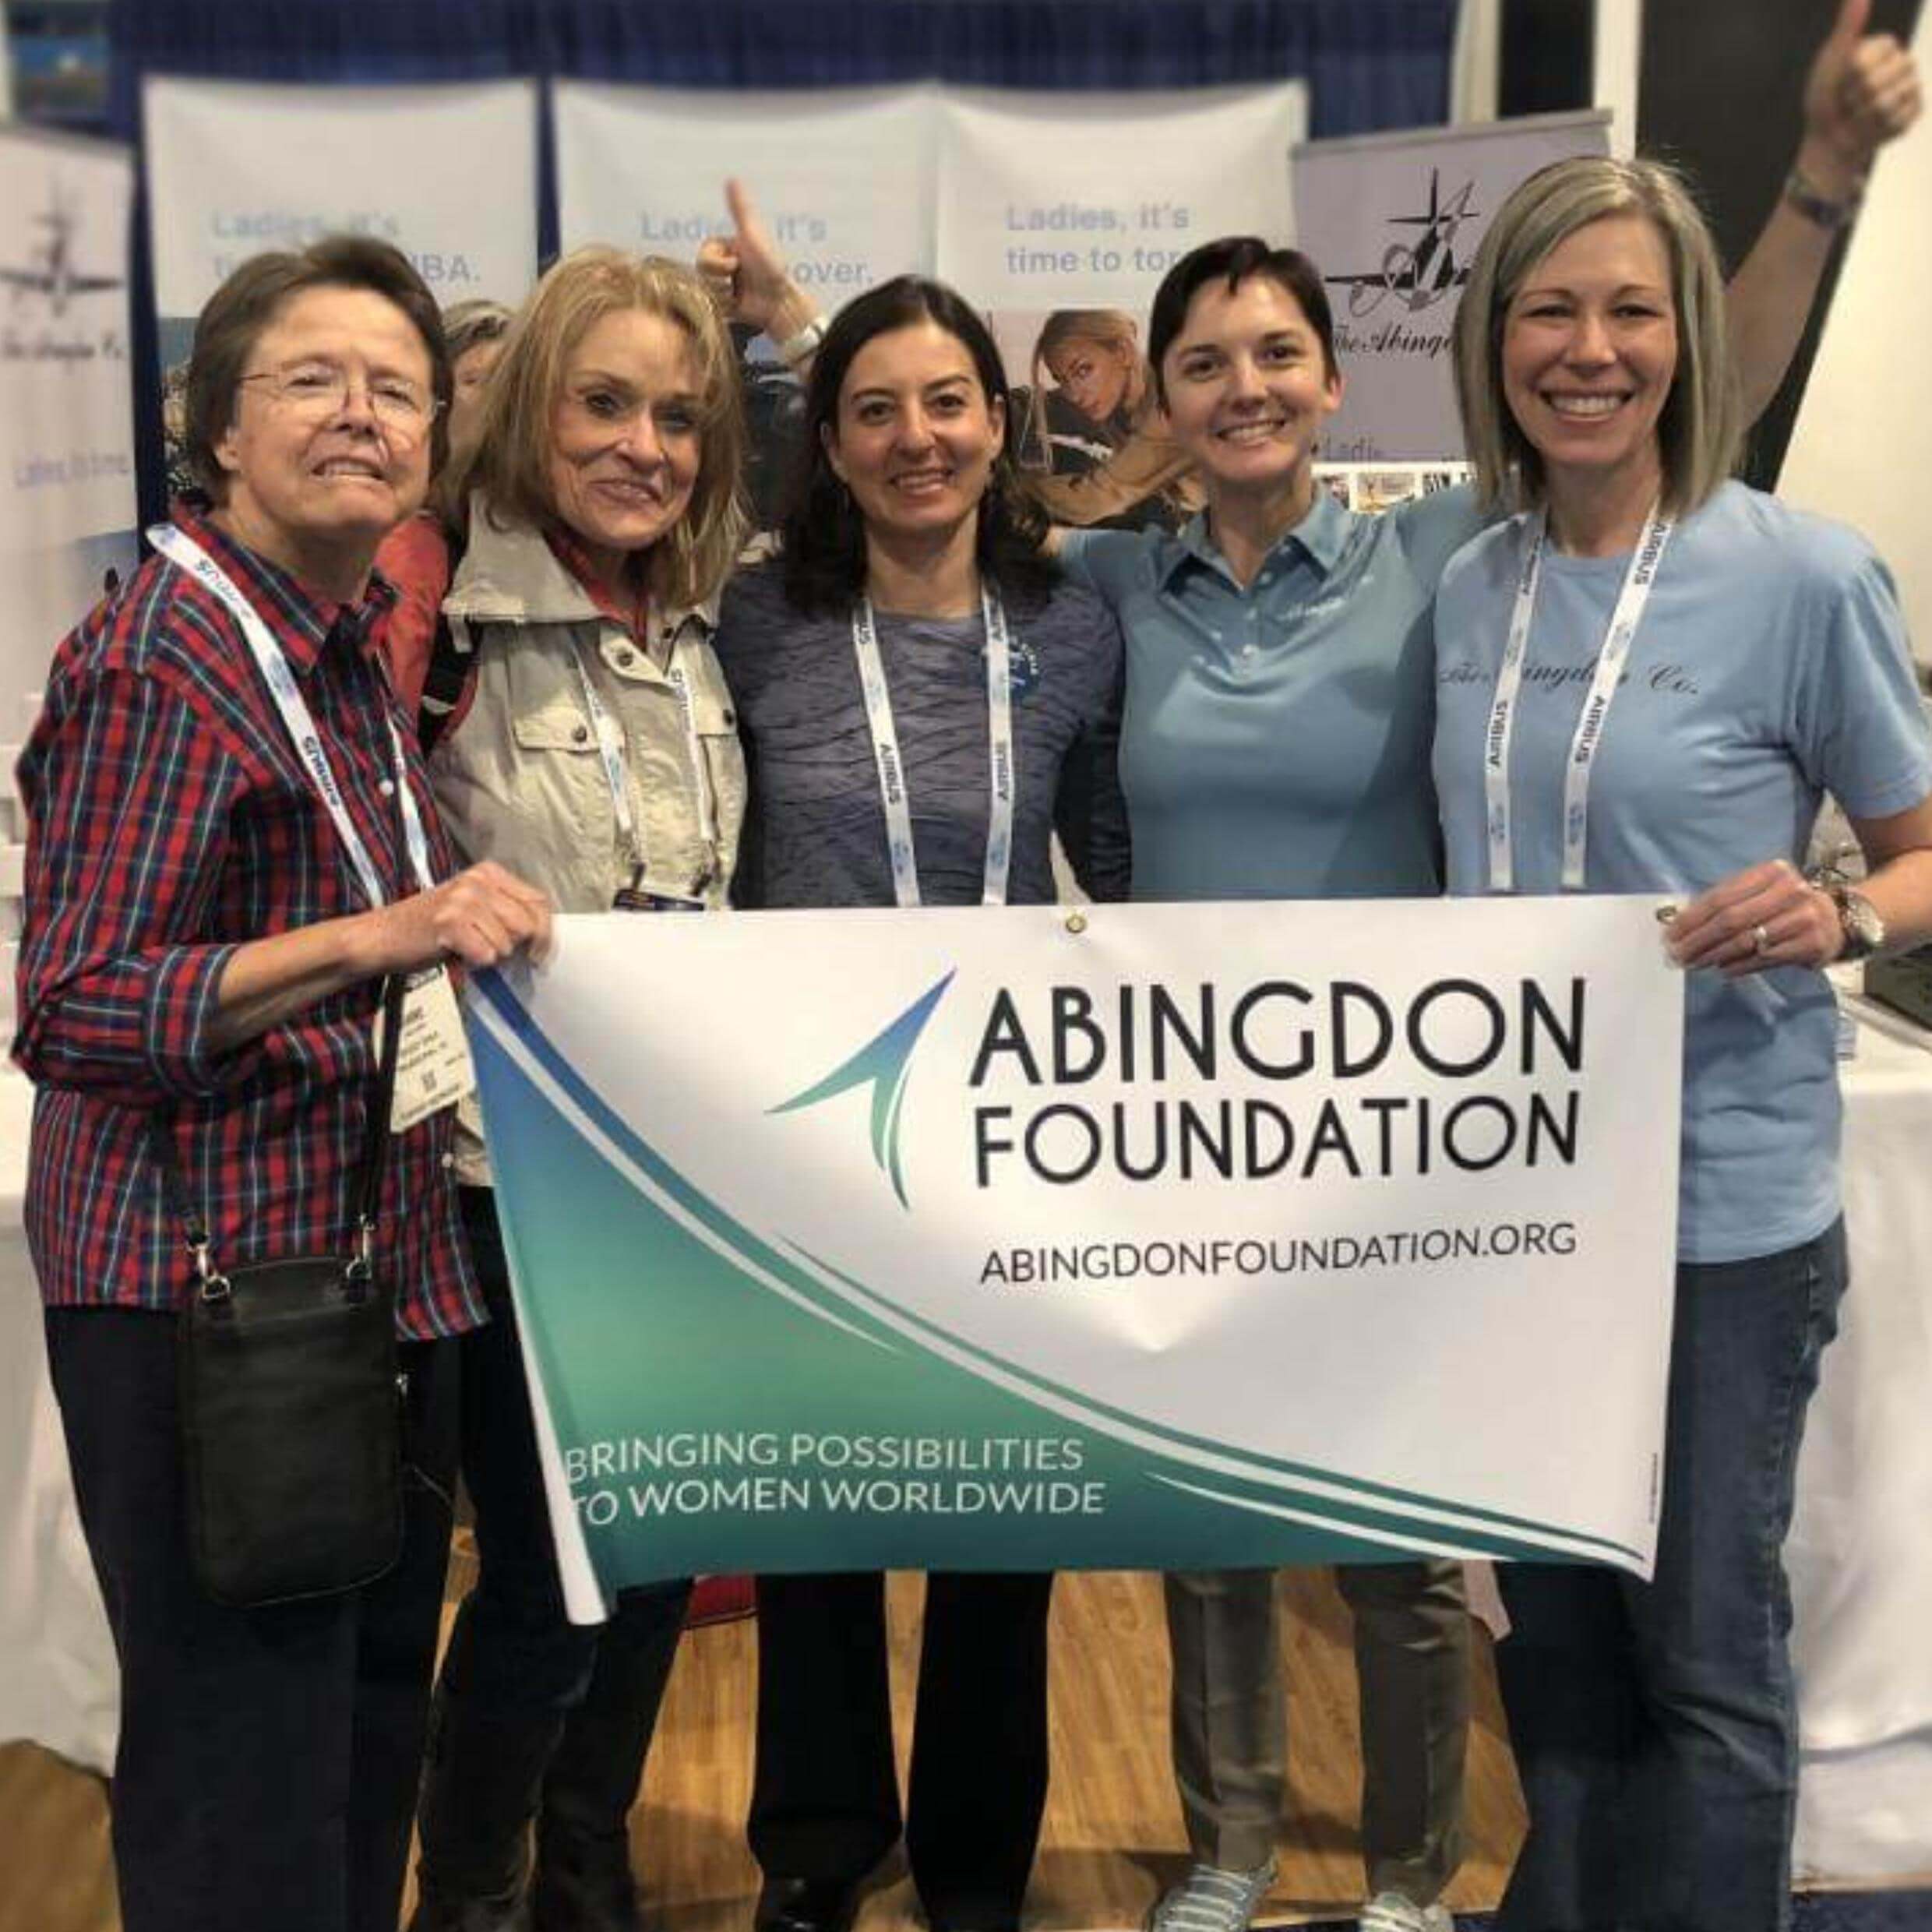 Five women standing at a tradeshow booth holding a banner. The woman in the middle of the five is a scholarship winner who was awarded a fully paid trip to the event. The four other women are mentors and advisors. 